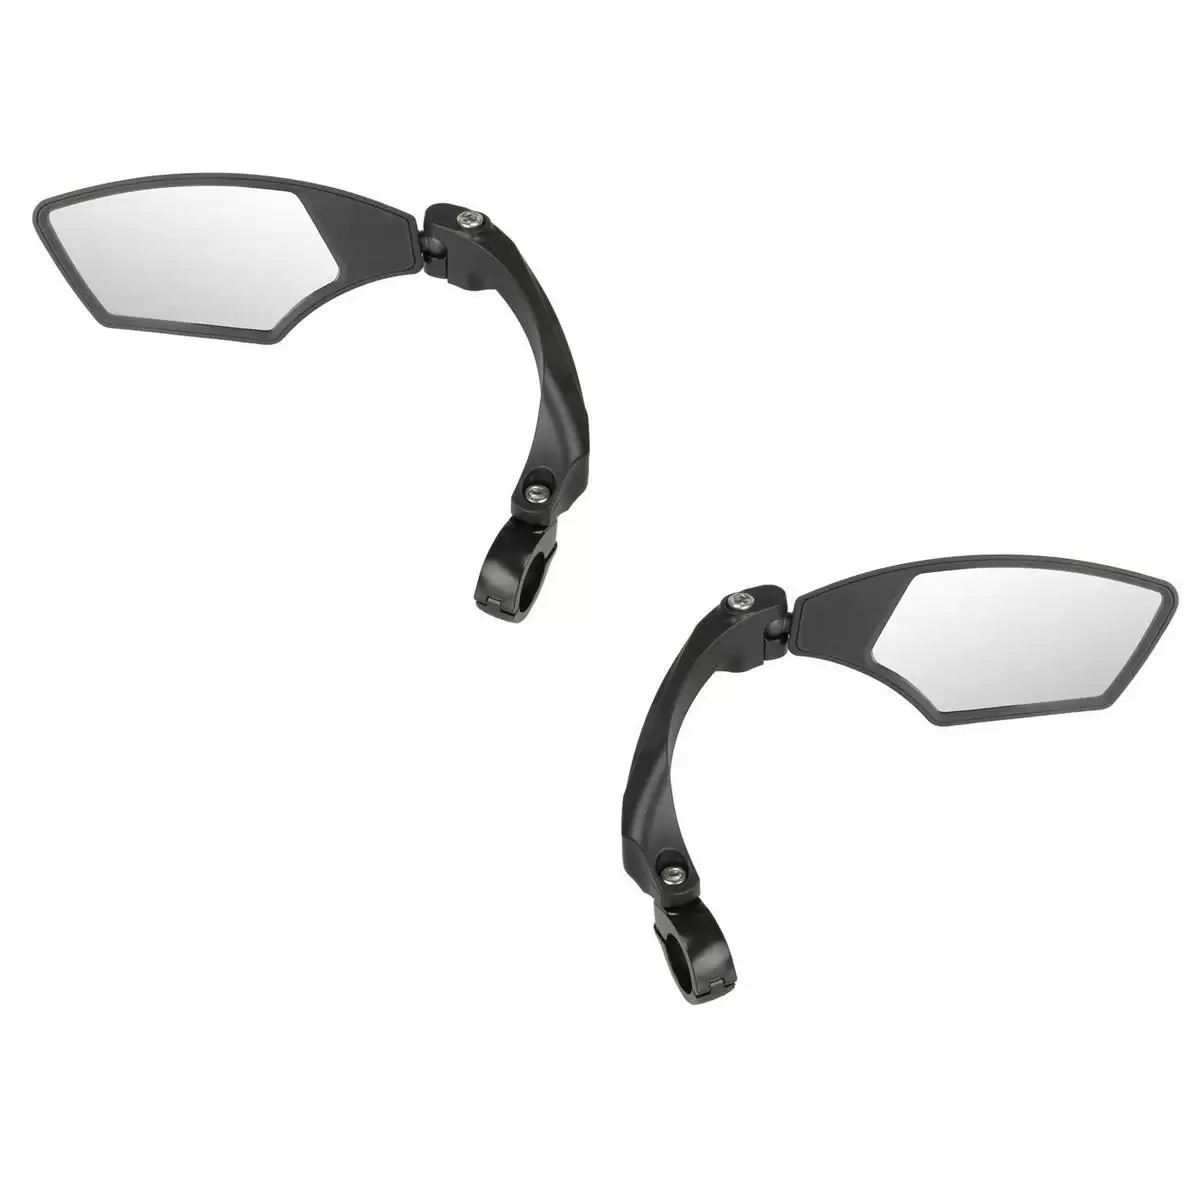 Left / Right Spy space mirror kit for bicycles - image